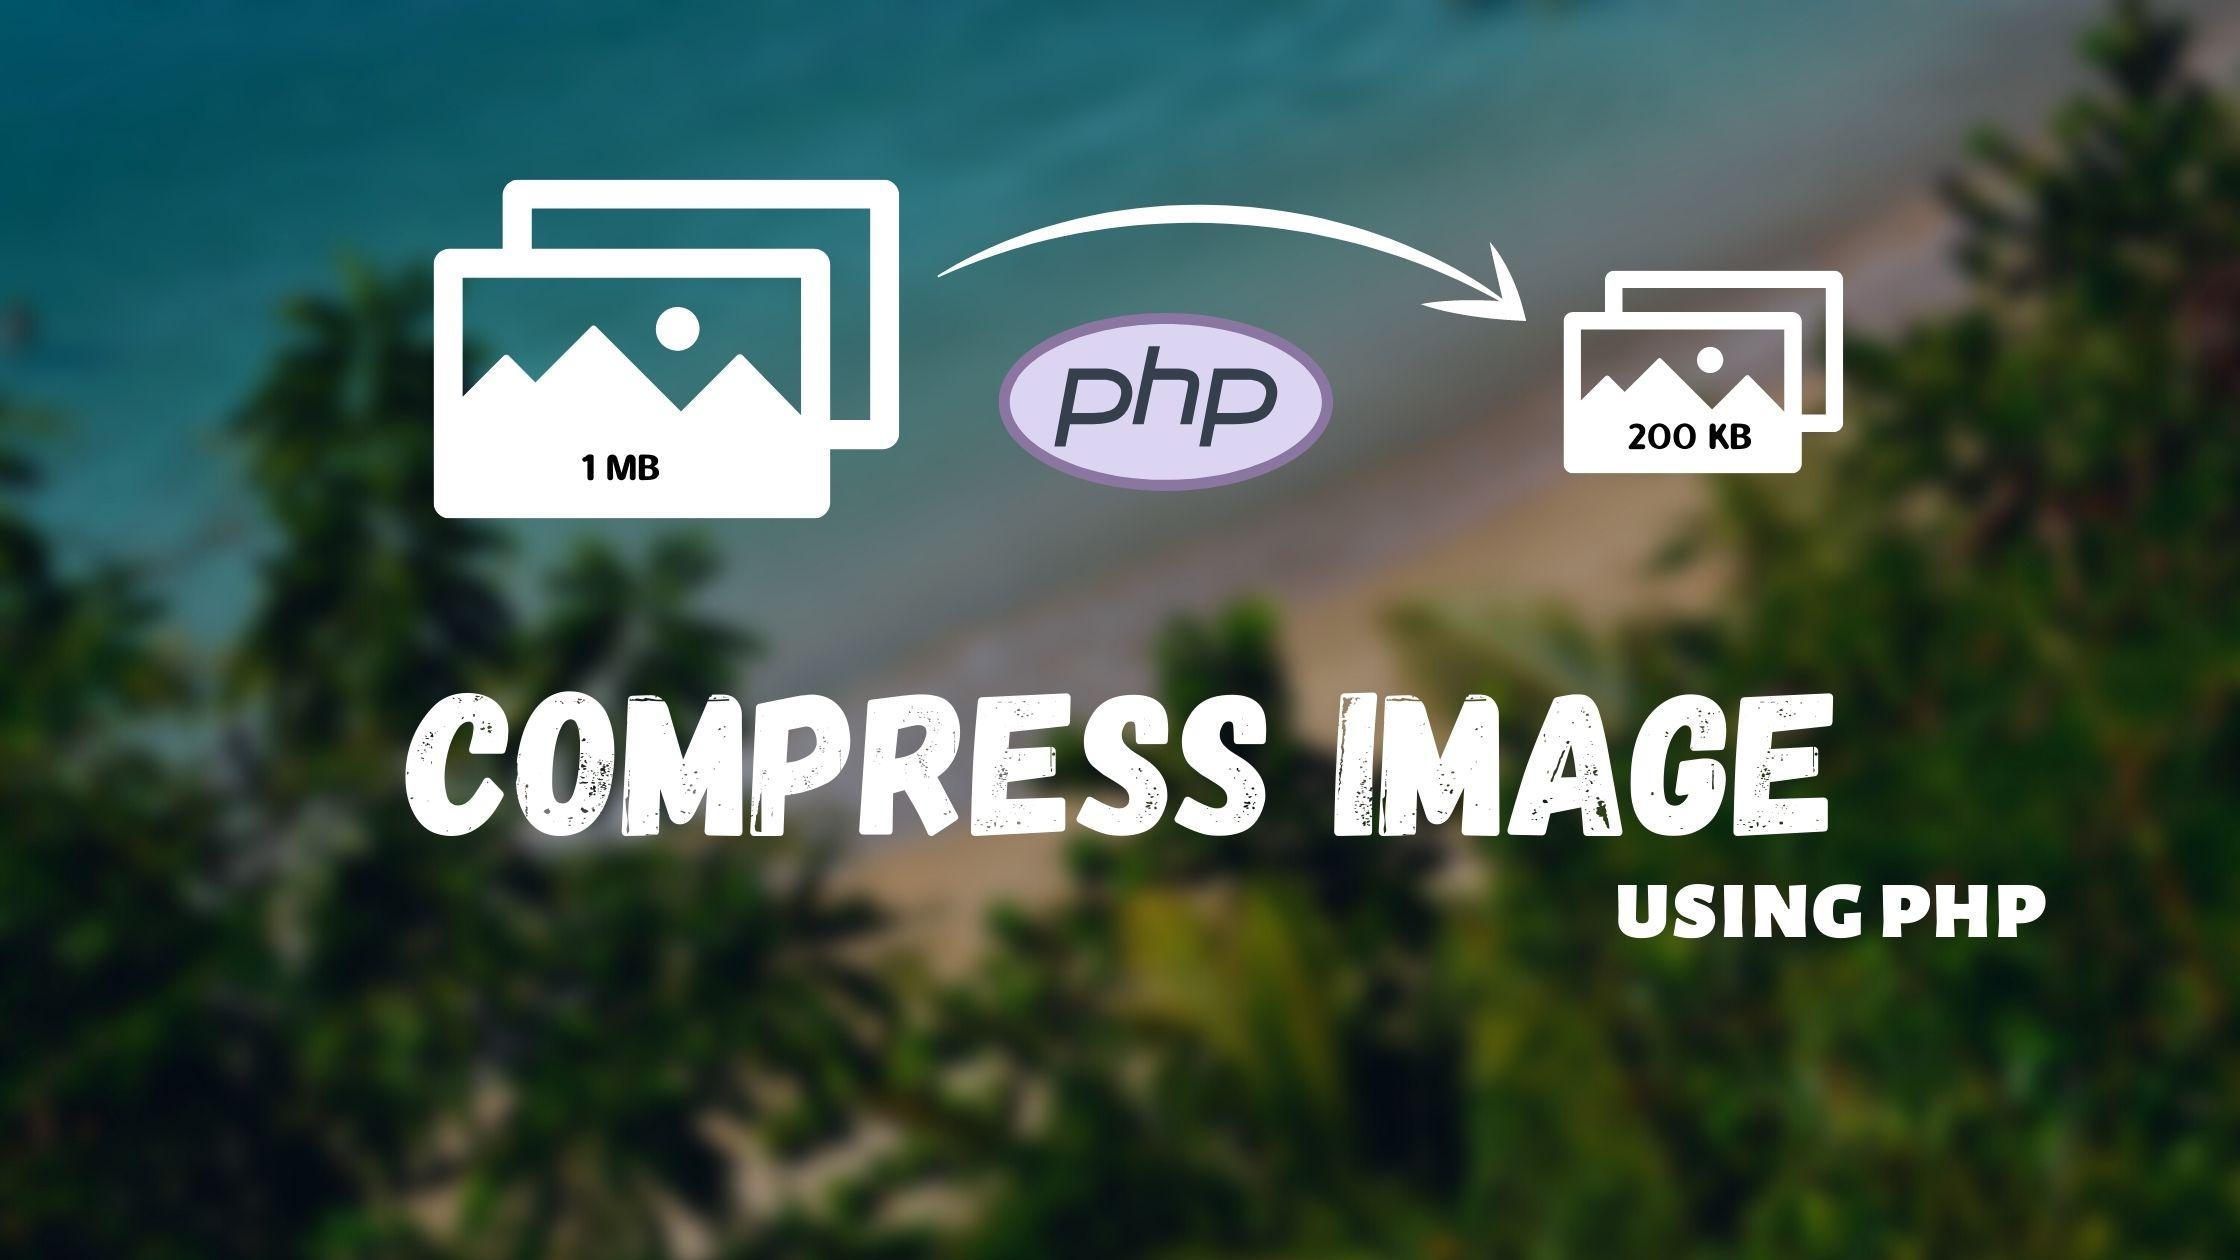 Compress Image using PHP